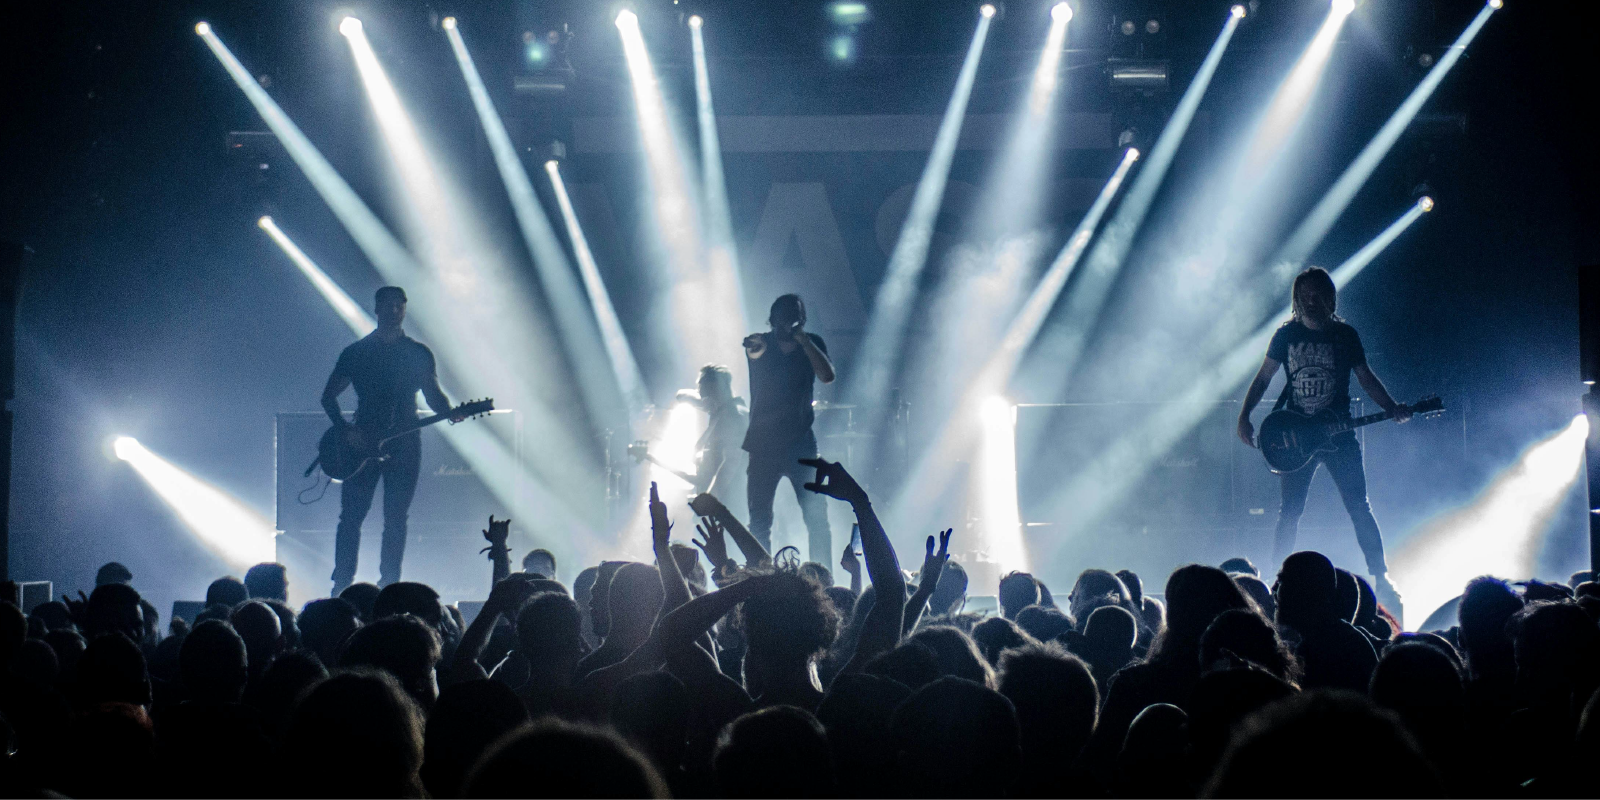 Concert Liability Explained: Know Your Rights